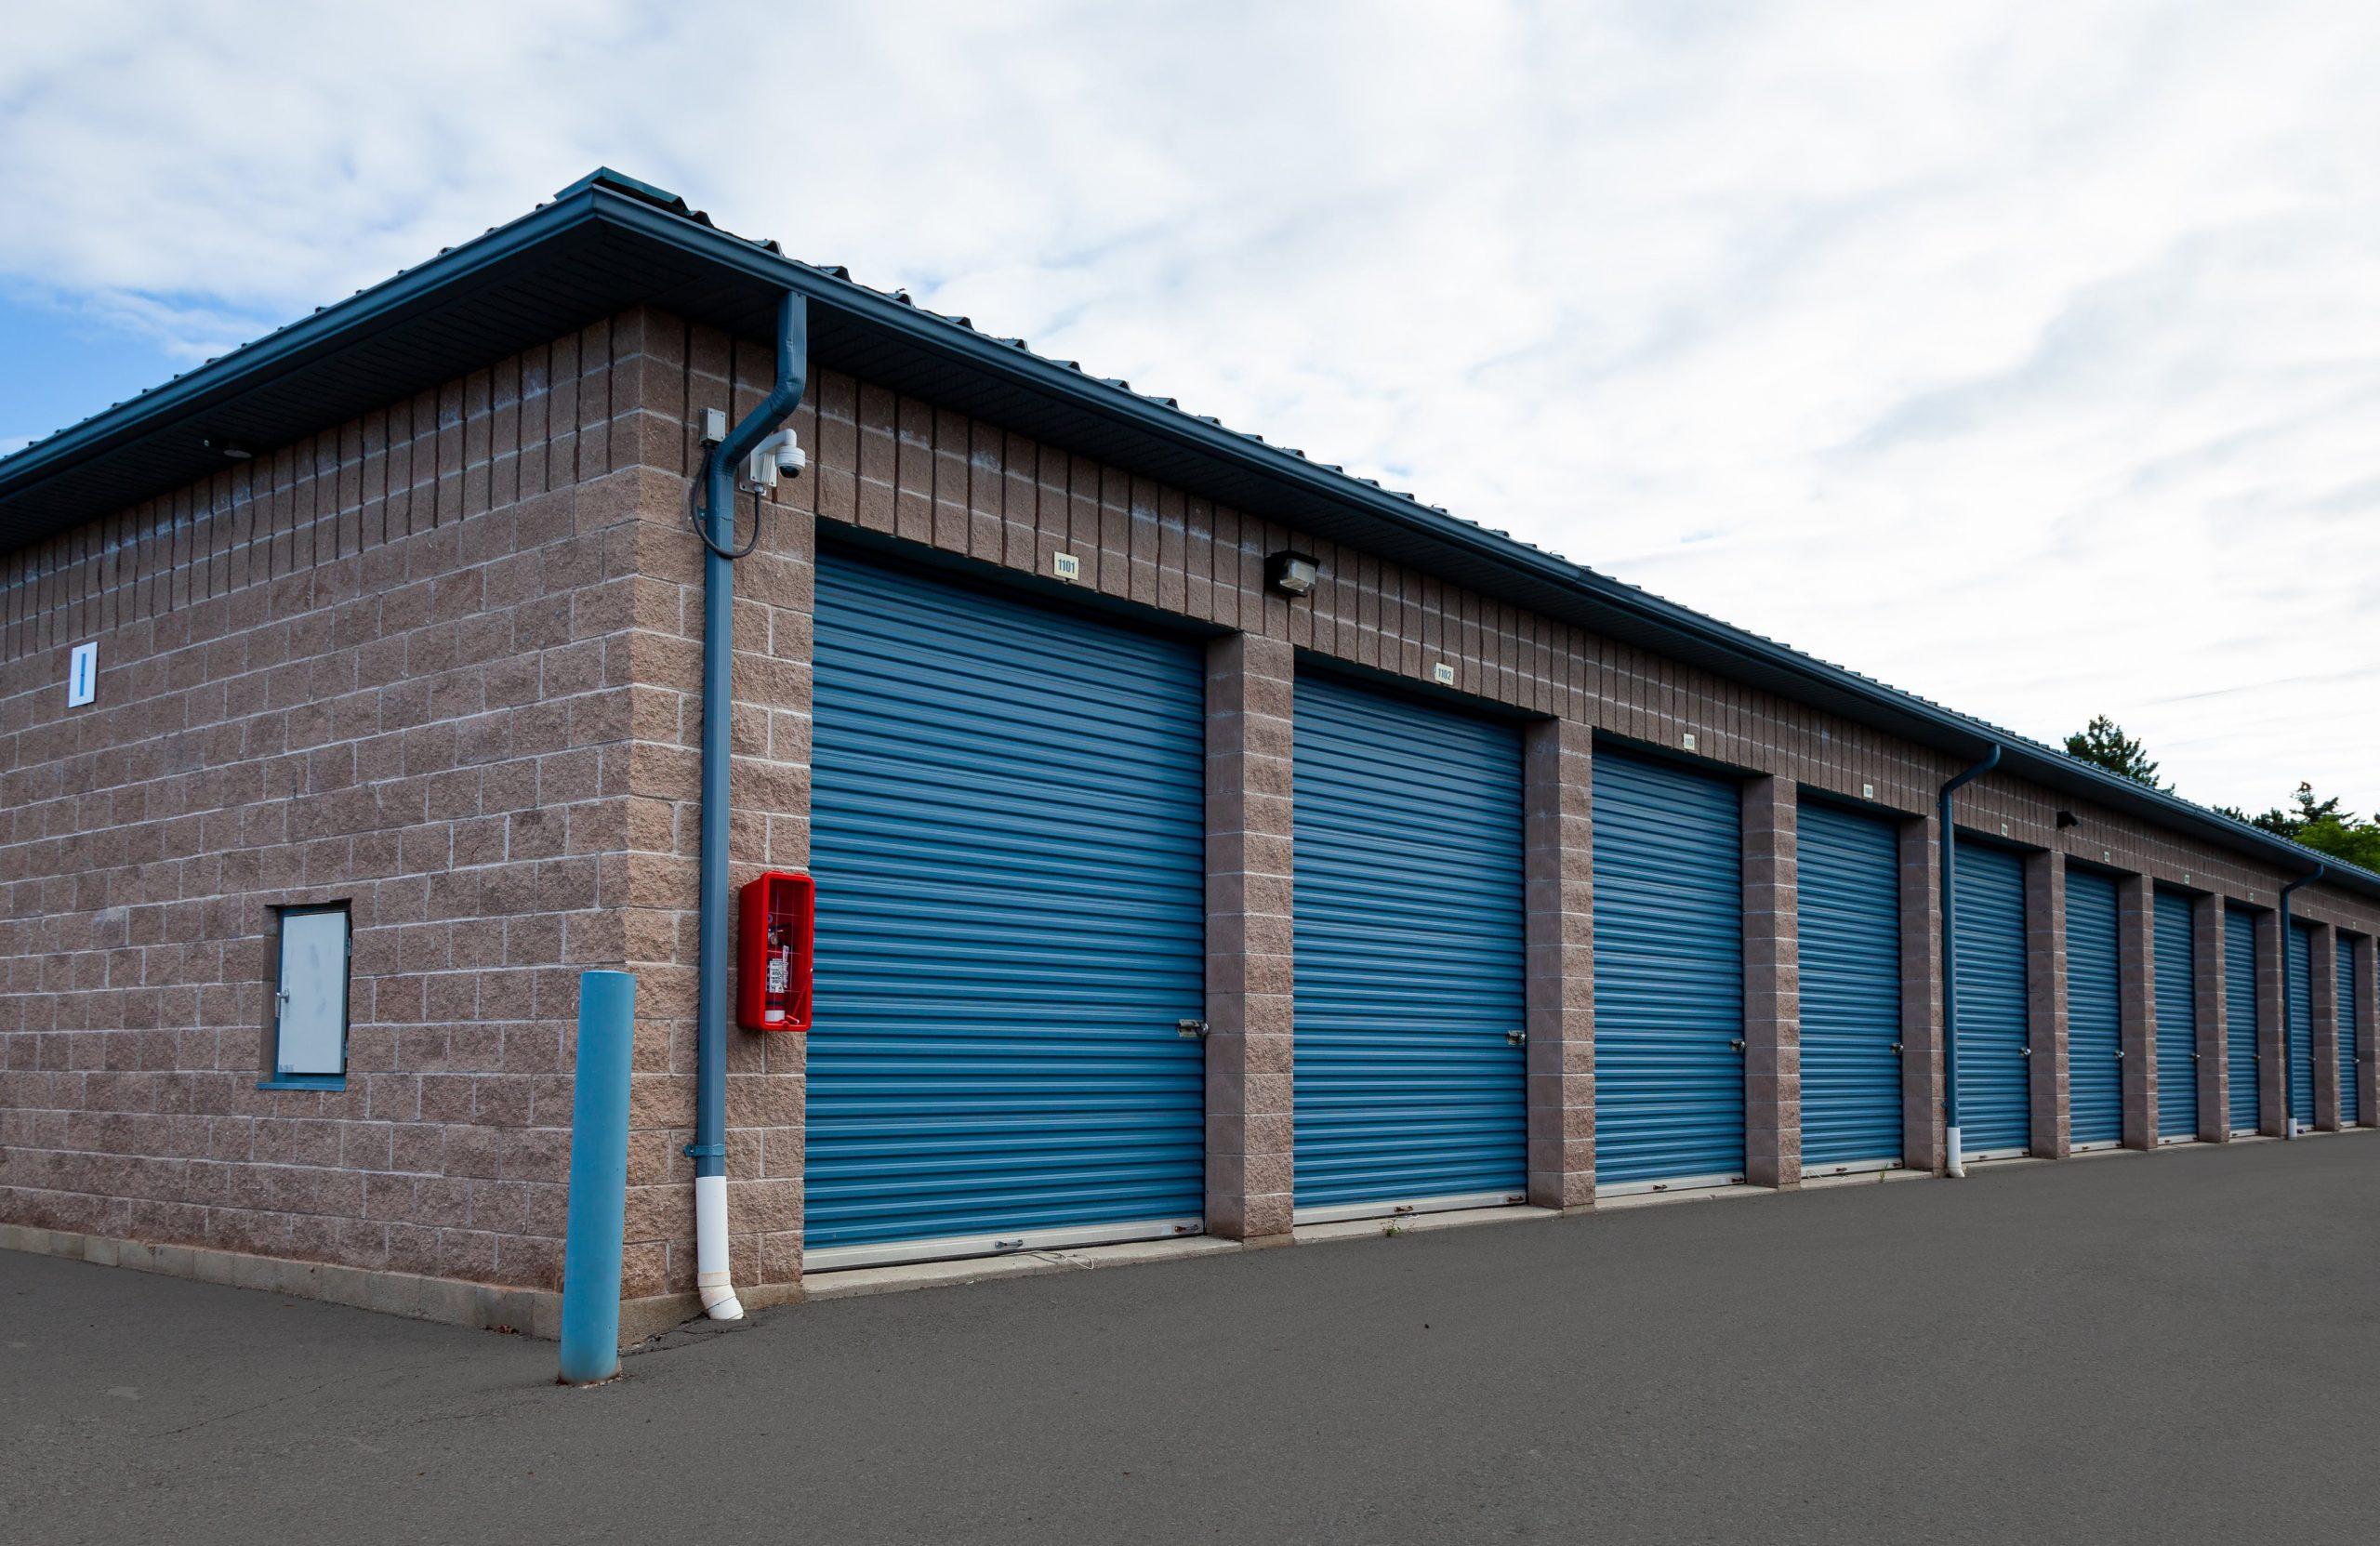 Renting a Storage Unit: What You Need to Consider